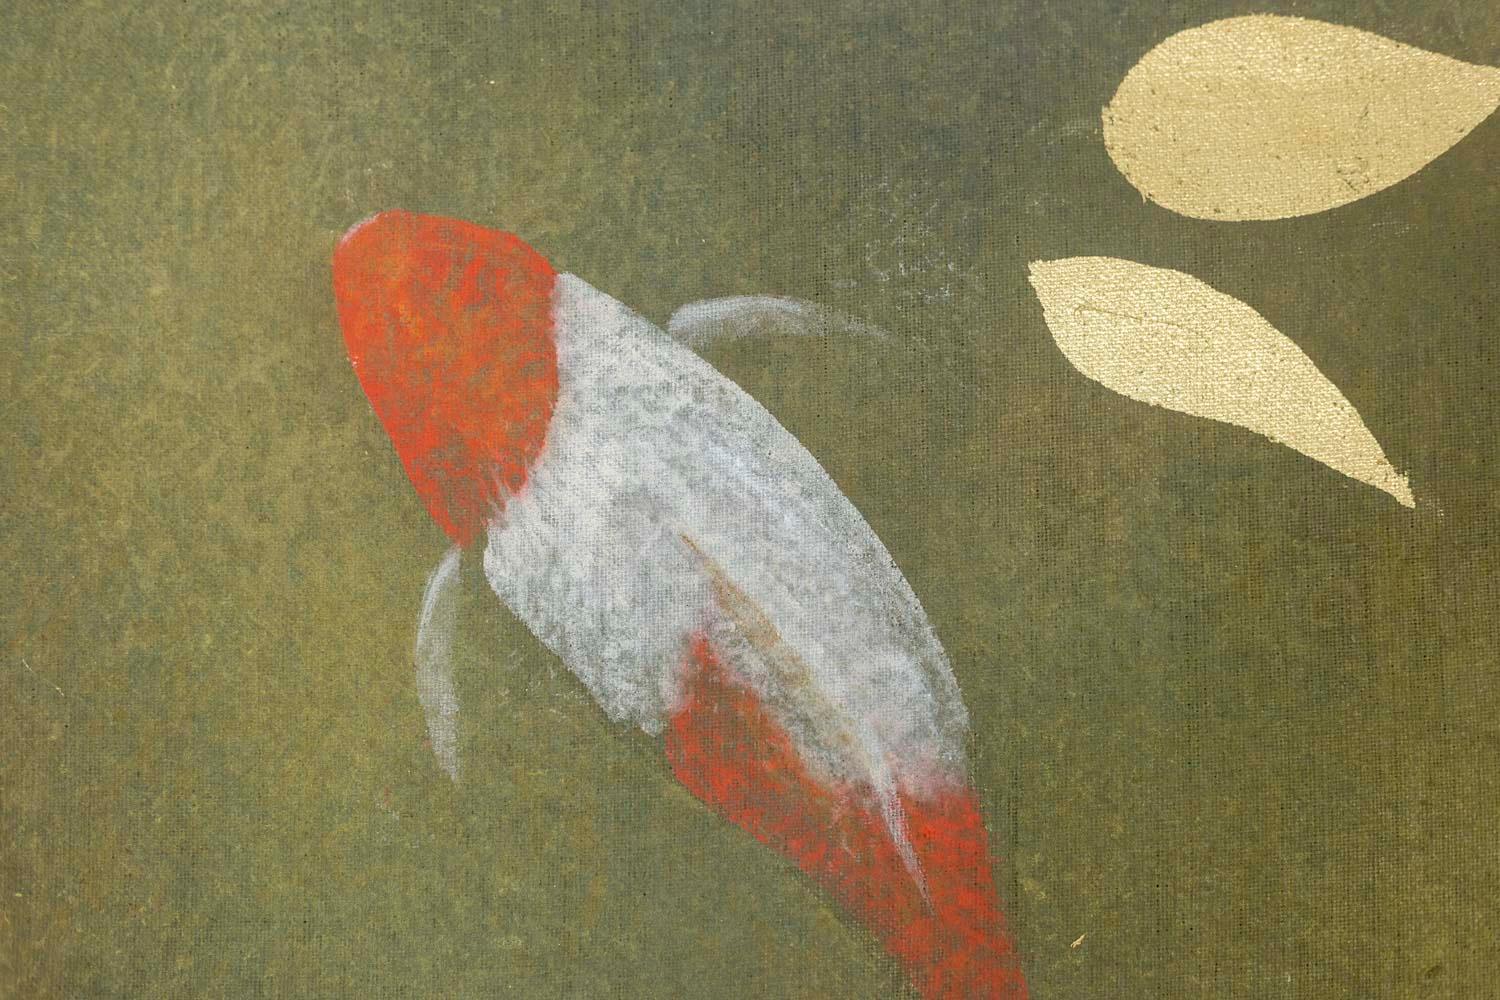 Painted canvas representing koi carp.

Raw linen canvas hand painted with natural pigments and golden patterns made with copper leaf. Canvas stretched with two wooden rods, the lower one of which is removable, allowing it to be rolled up for